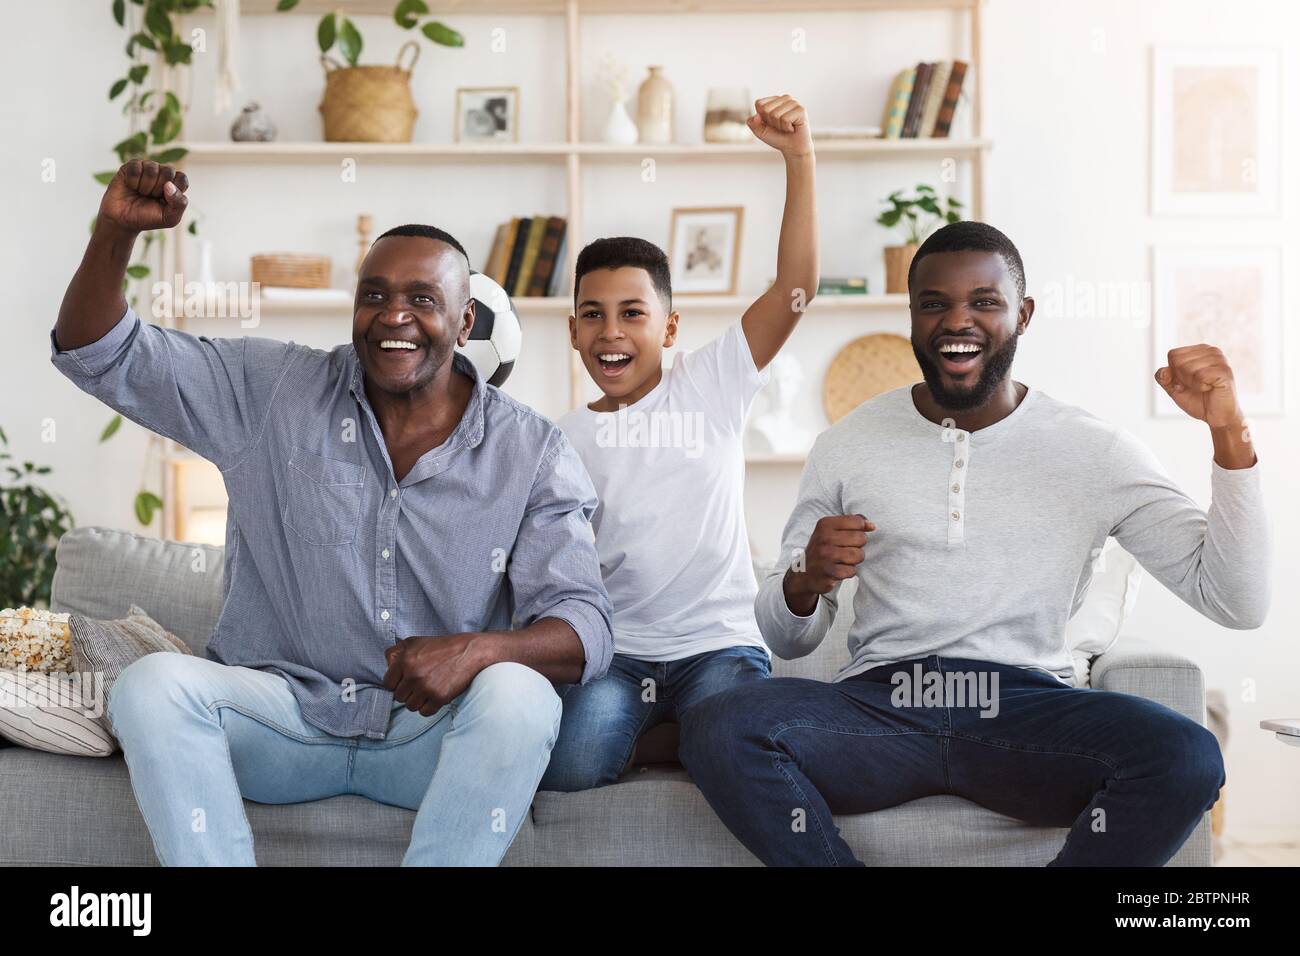 Soccer Fans. African Father, Son And Grandfather Watching Football Game On TV Stock Photo